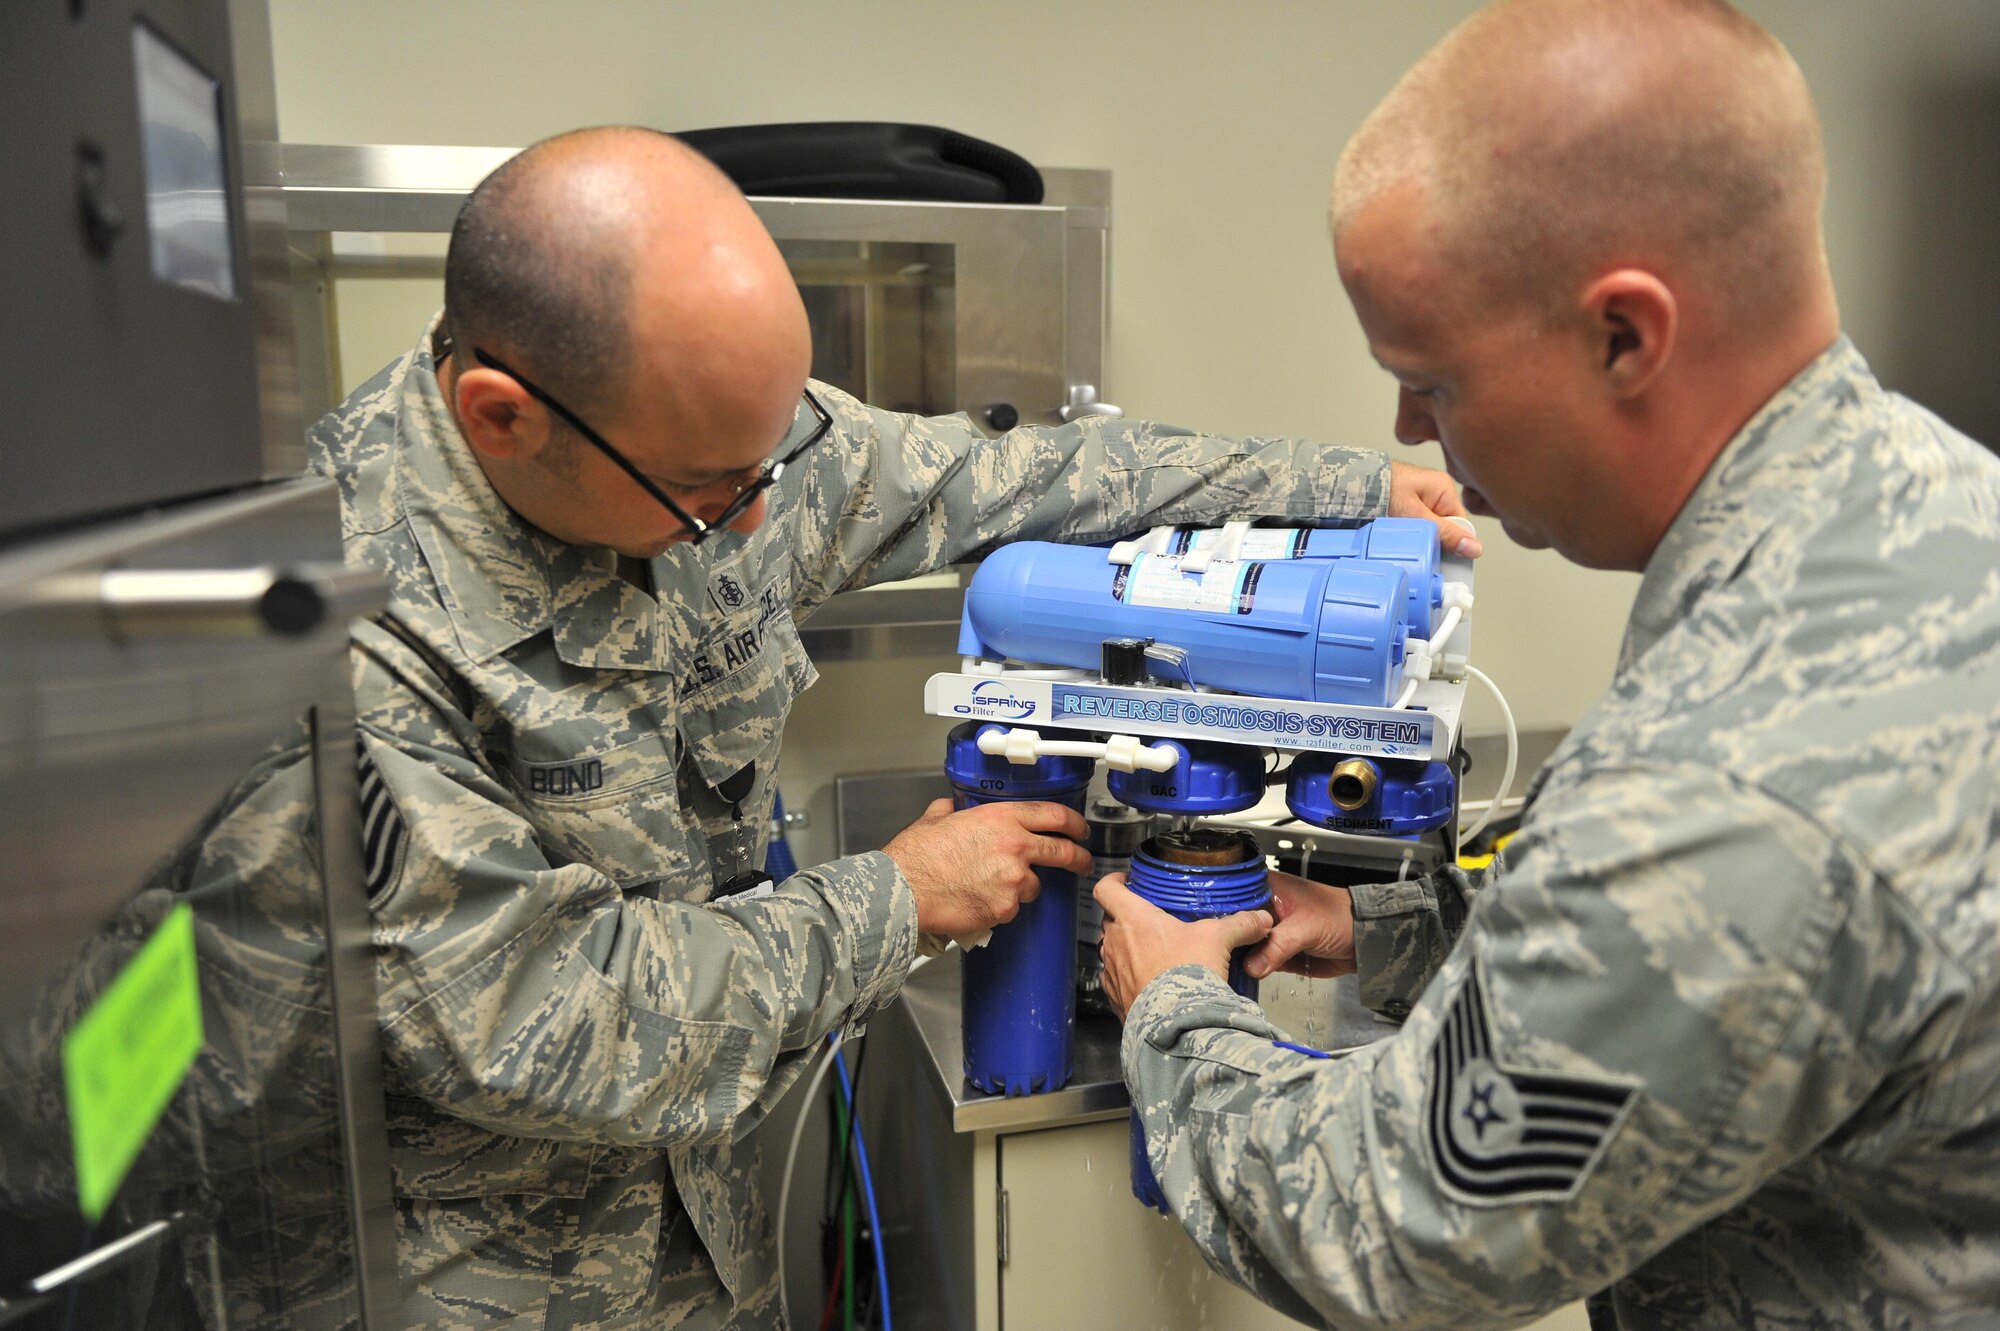 U.S. Air Force Tech. Sgts. Christian Bond and Zach Brown, 97th Medical Group bioenvironmental medical equipment technicians, change a filter on a reverse-osmosis water treatment setup inside the dental clinic at Altus Air Force Base, Oklahoma, Aug. 13, 2015. Bond and Brown change the filters monthly to ensure the dental clinic has clean water for cleaning and sanitizing dental equipment. (U.S. Air Force photo by Senior Airman Dillon Davis)